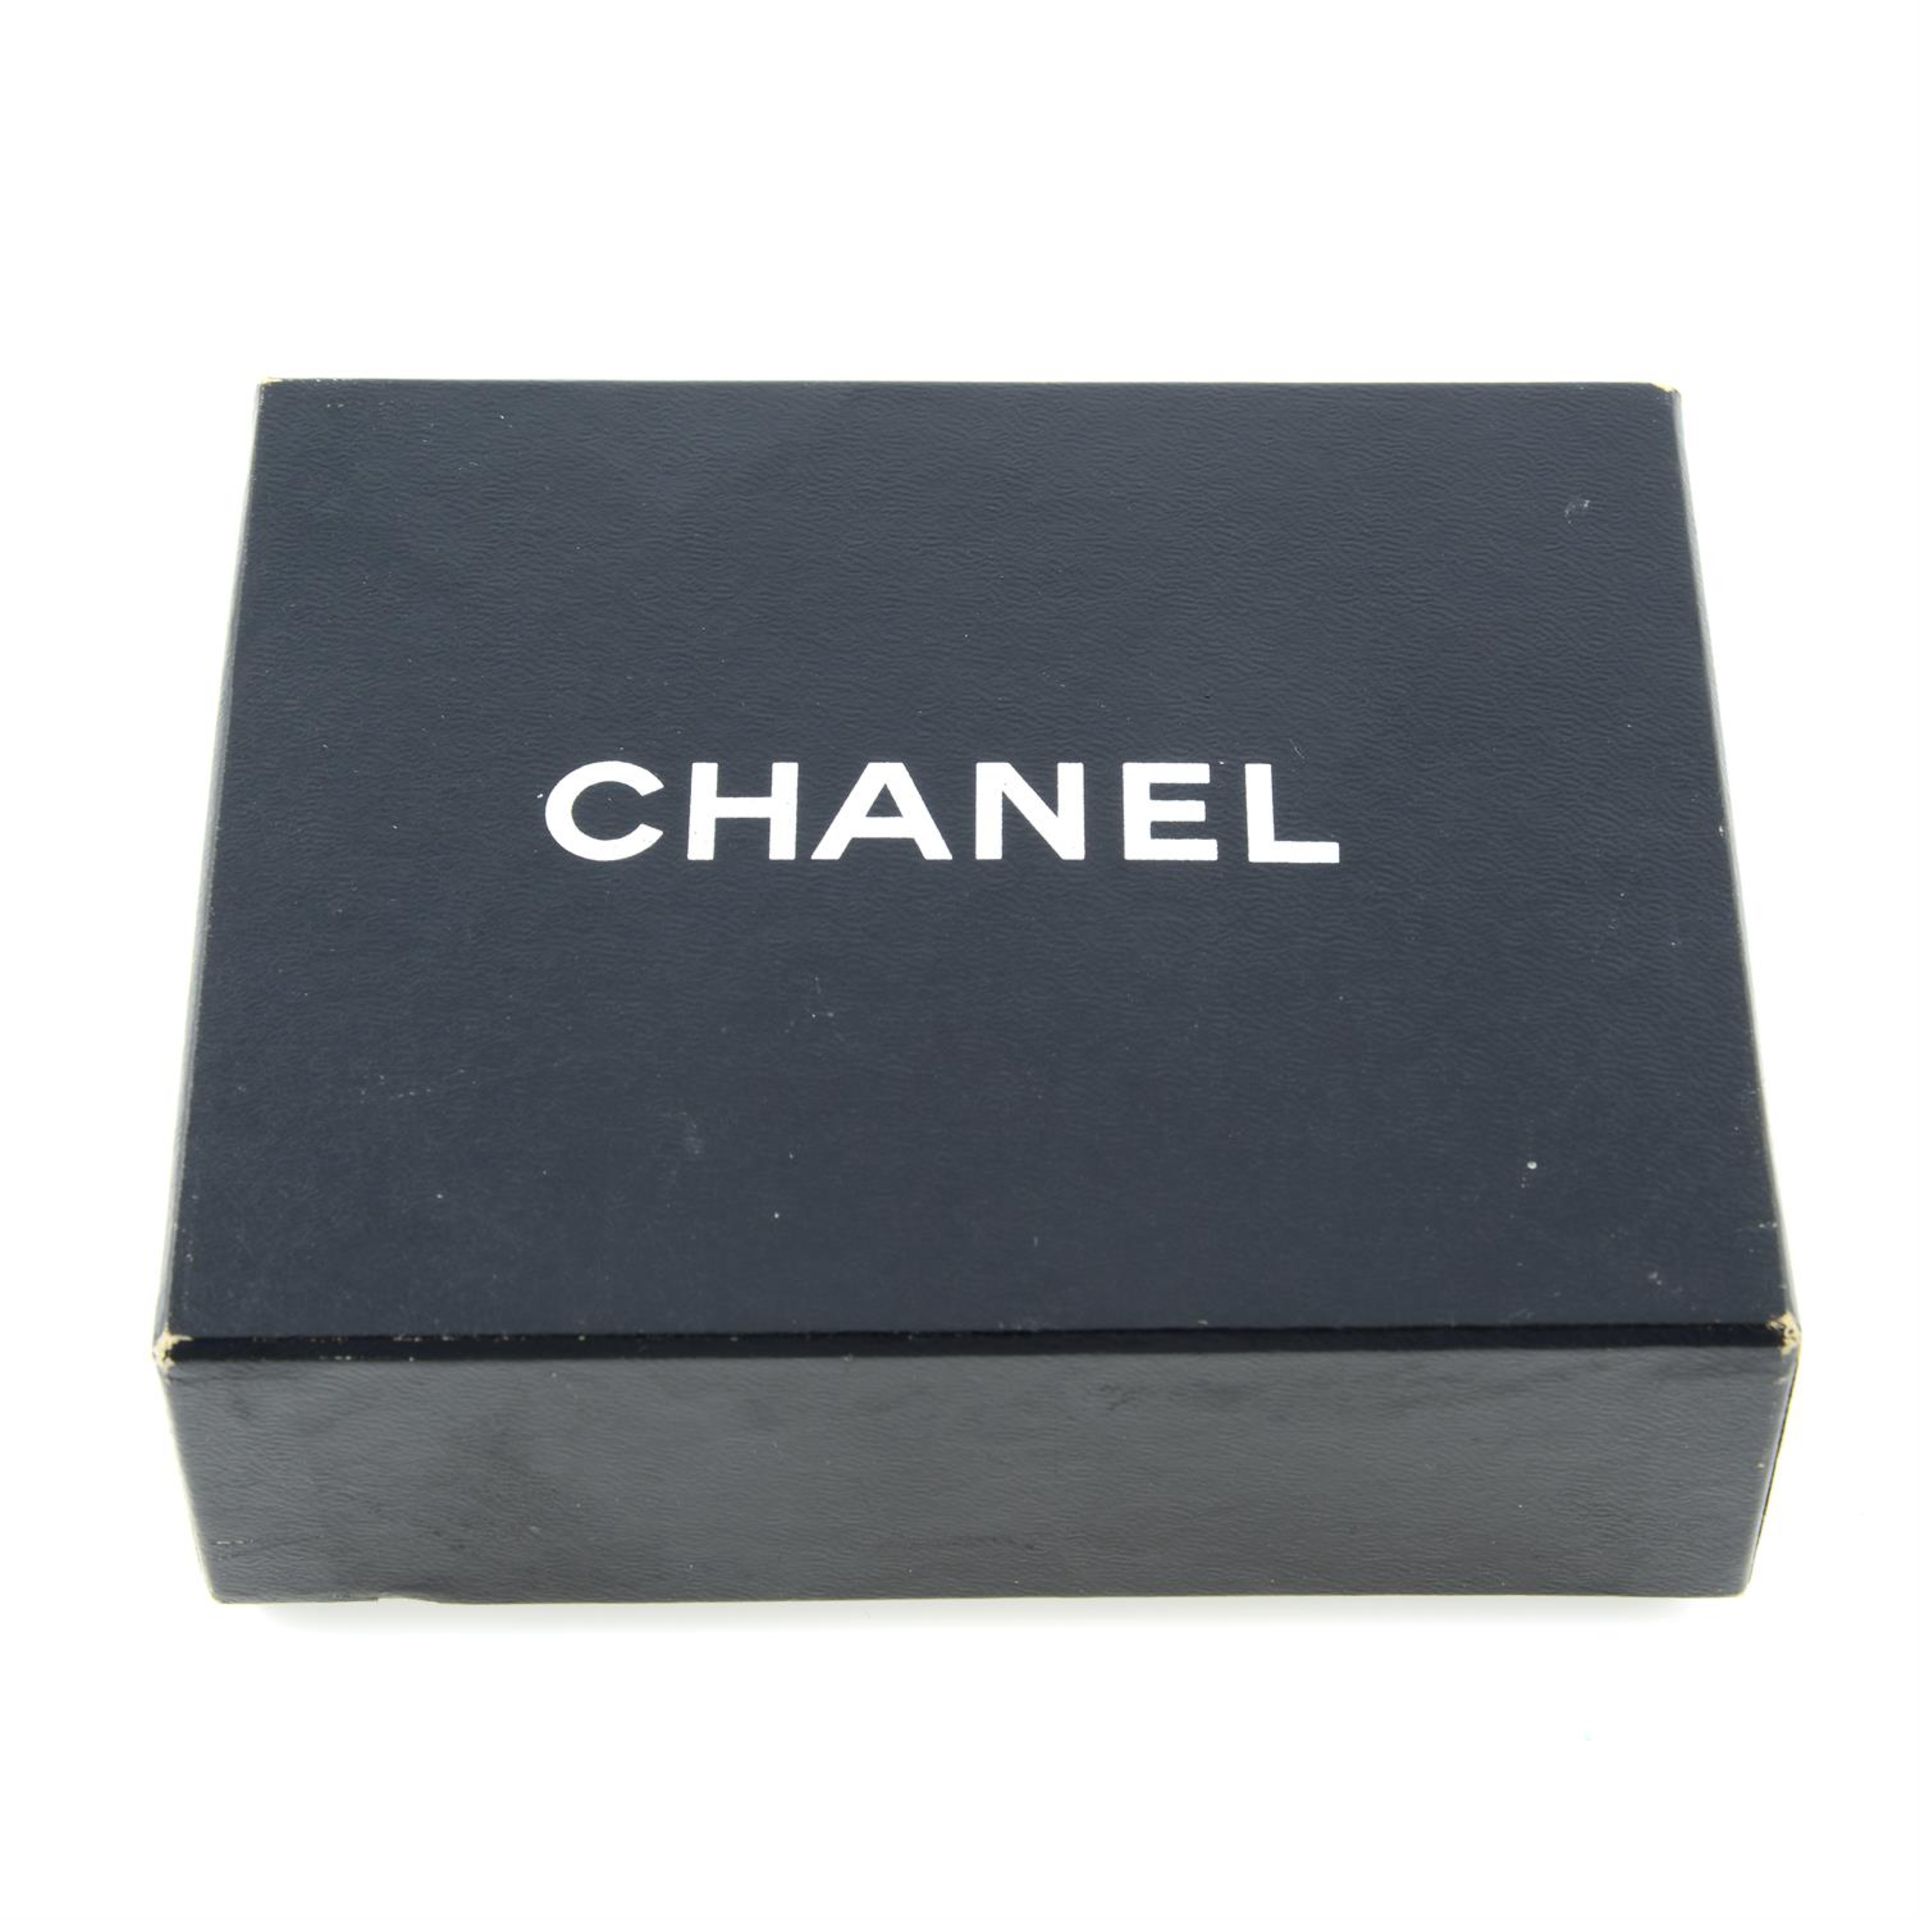 CHANEL - a 2003 compact purse. - Image 5 of 5